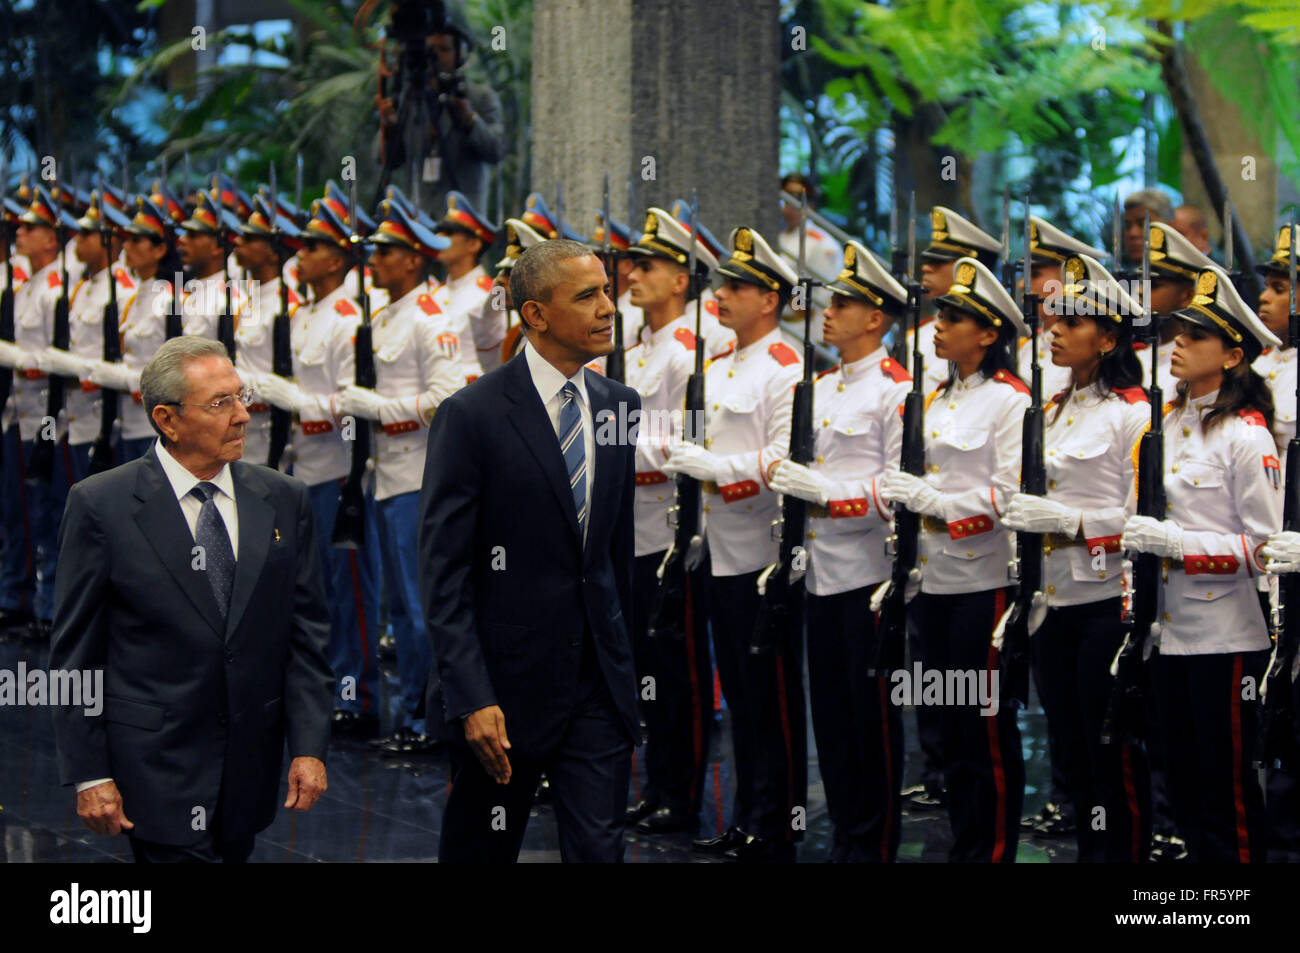 Havana, Havana. 21st Mar, 2016. Cuba's President Raul Castro(L, front) and U.S. President Barack Obama(R, front), inspect the guard of honour at Palace of the Revolution, in Havana, capital of Cuba on March 21, 2016. Barack Obama on Monday paid tribute to Cuban national hero Jose Marti in Havana, starting the official program of his historic visit to Cuba to strengthen the approach between the two countries. © Vladimir Molina/Prensa Latina/Xinhua/Alamy Live News Stock Photo